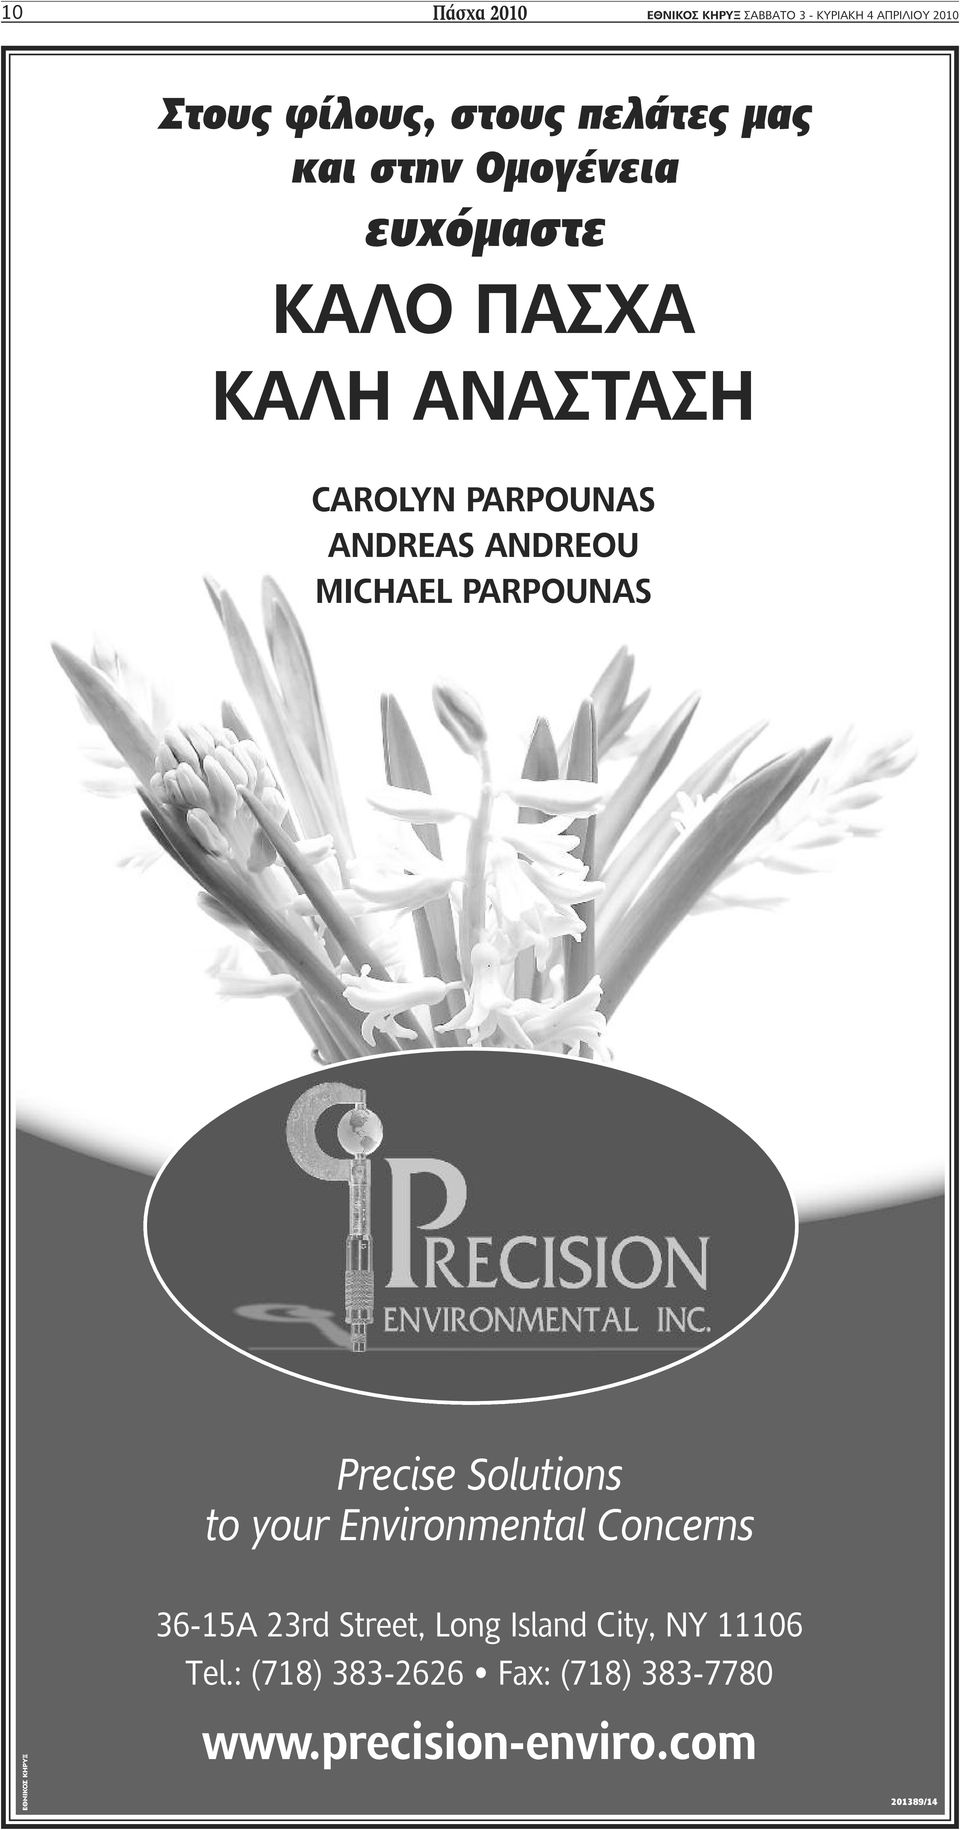 MICHAEL PARPOUNAS Precise Solutions to your Environmental Concerns 36-15A 23rd Street, Long